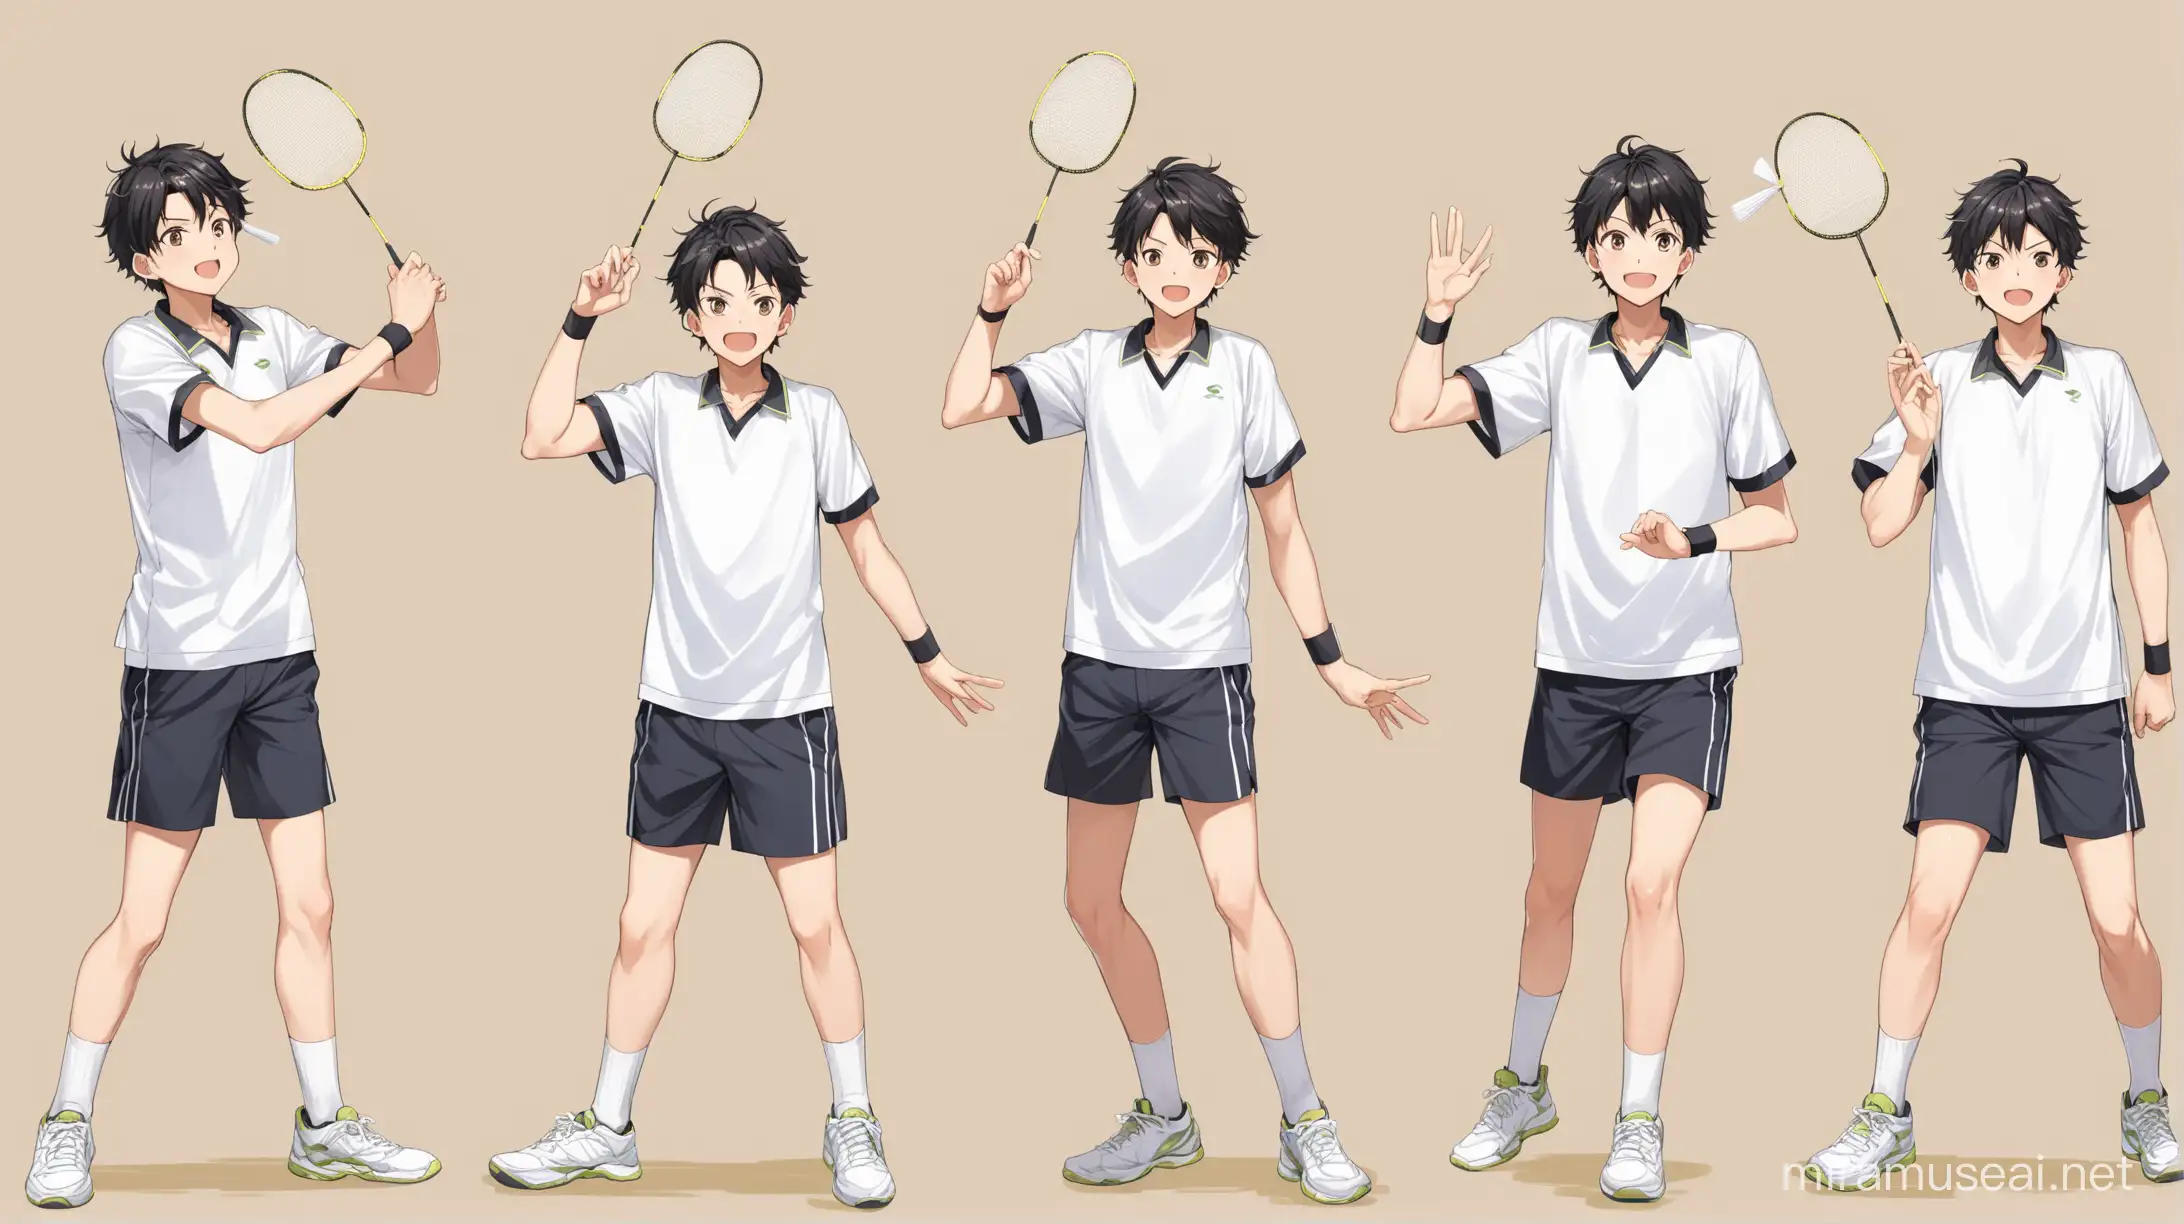 Youthful Badminton Enthusiast Dynamic Serving Positions